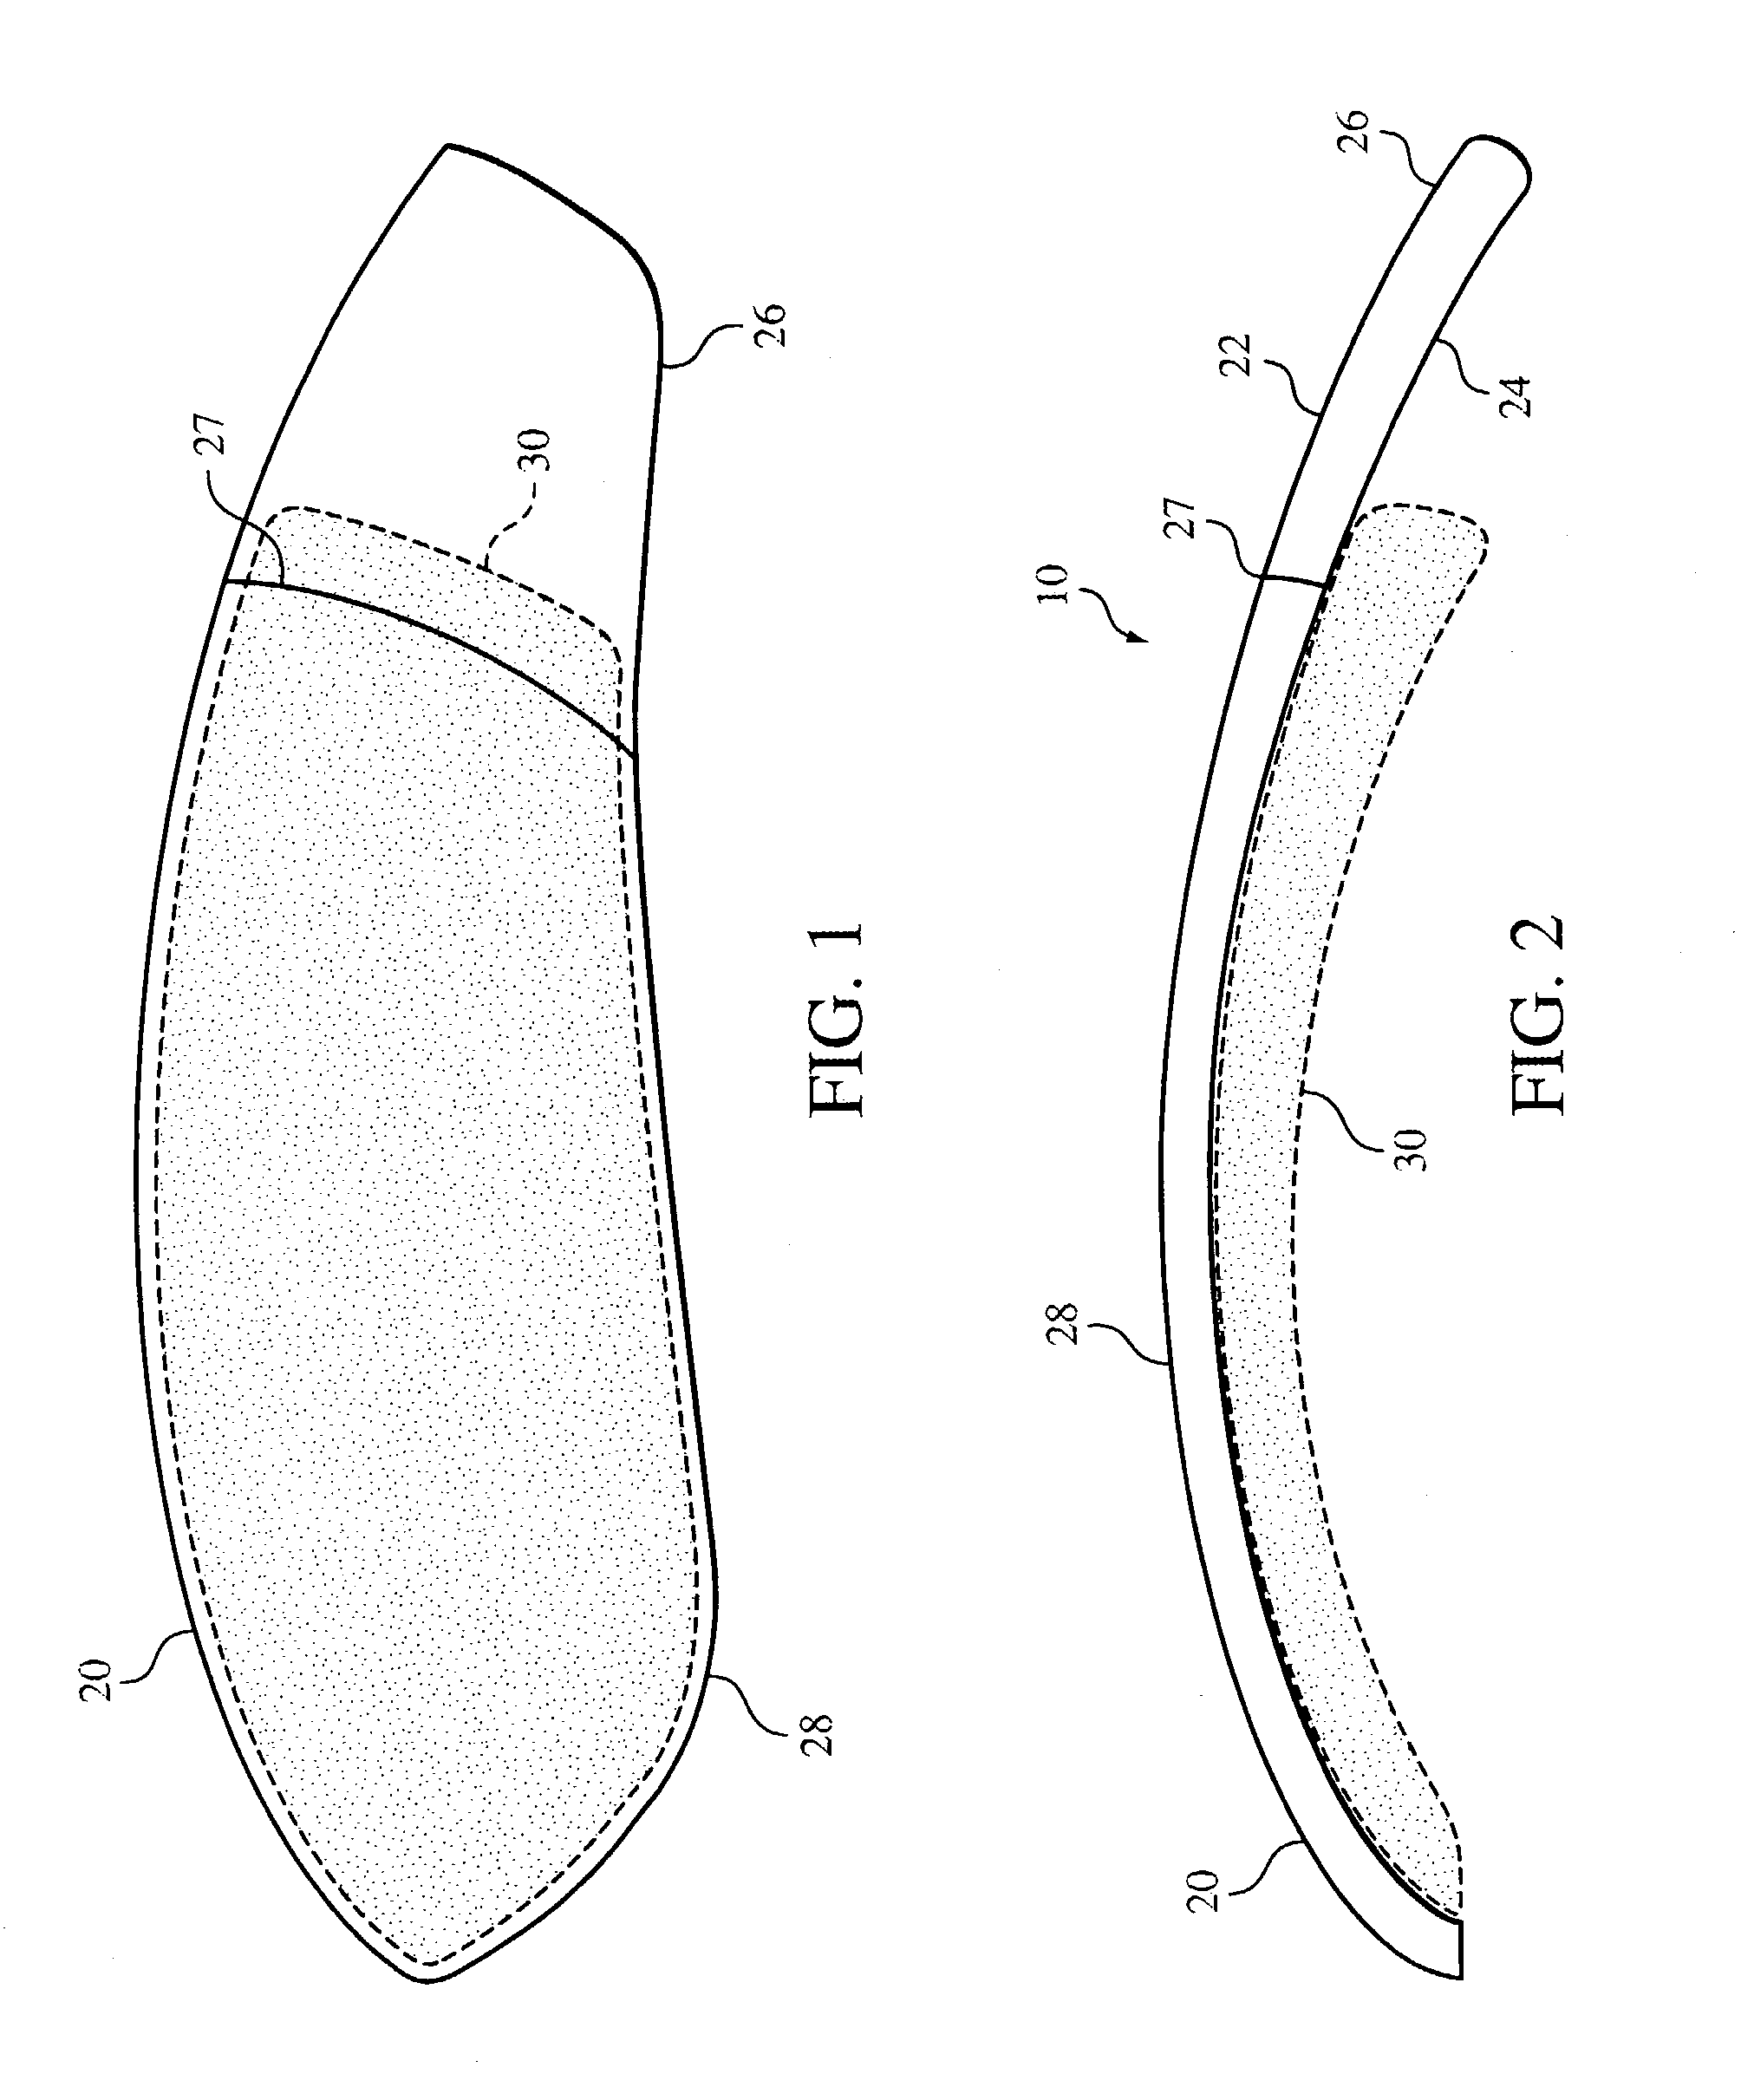 Conformable artificial fingernail and method of making same